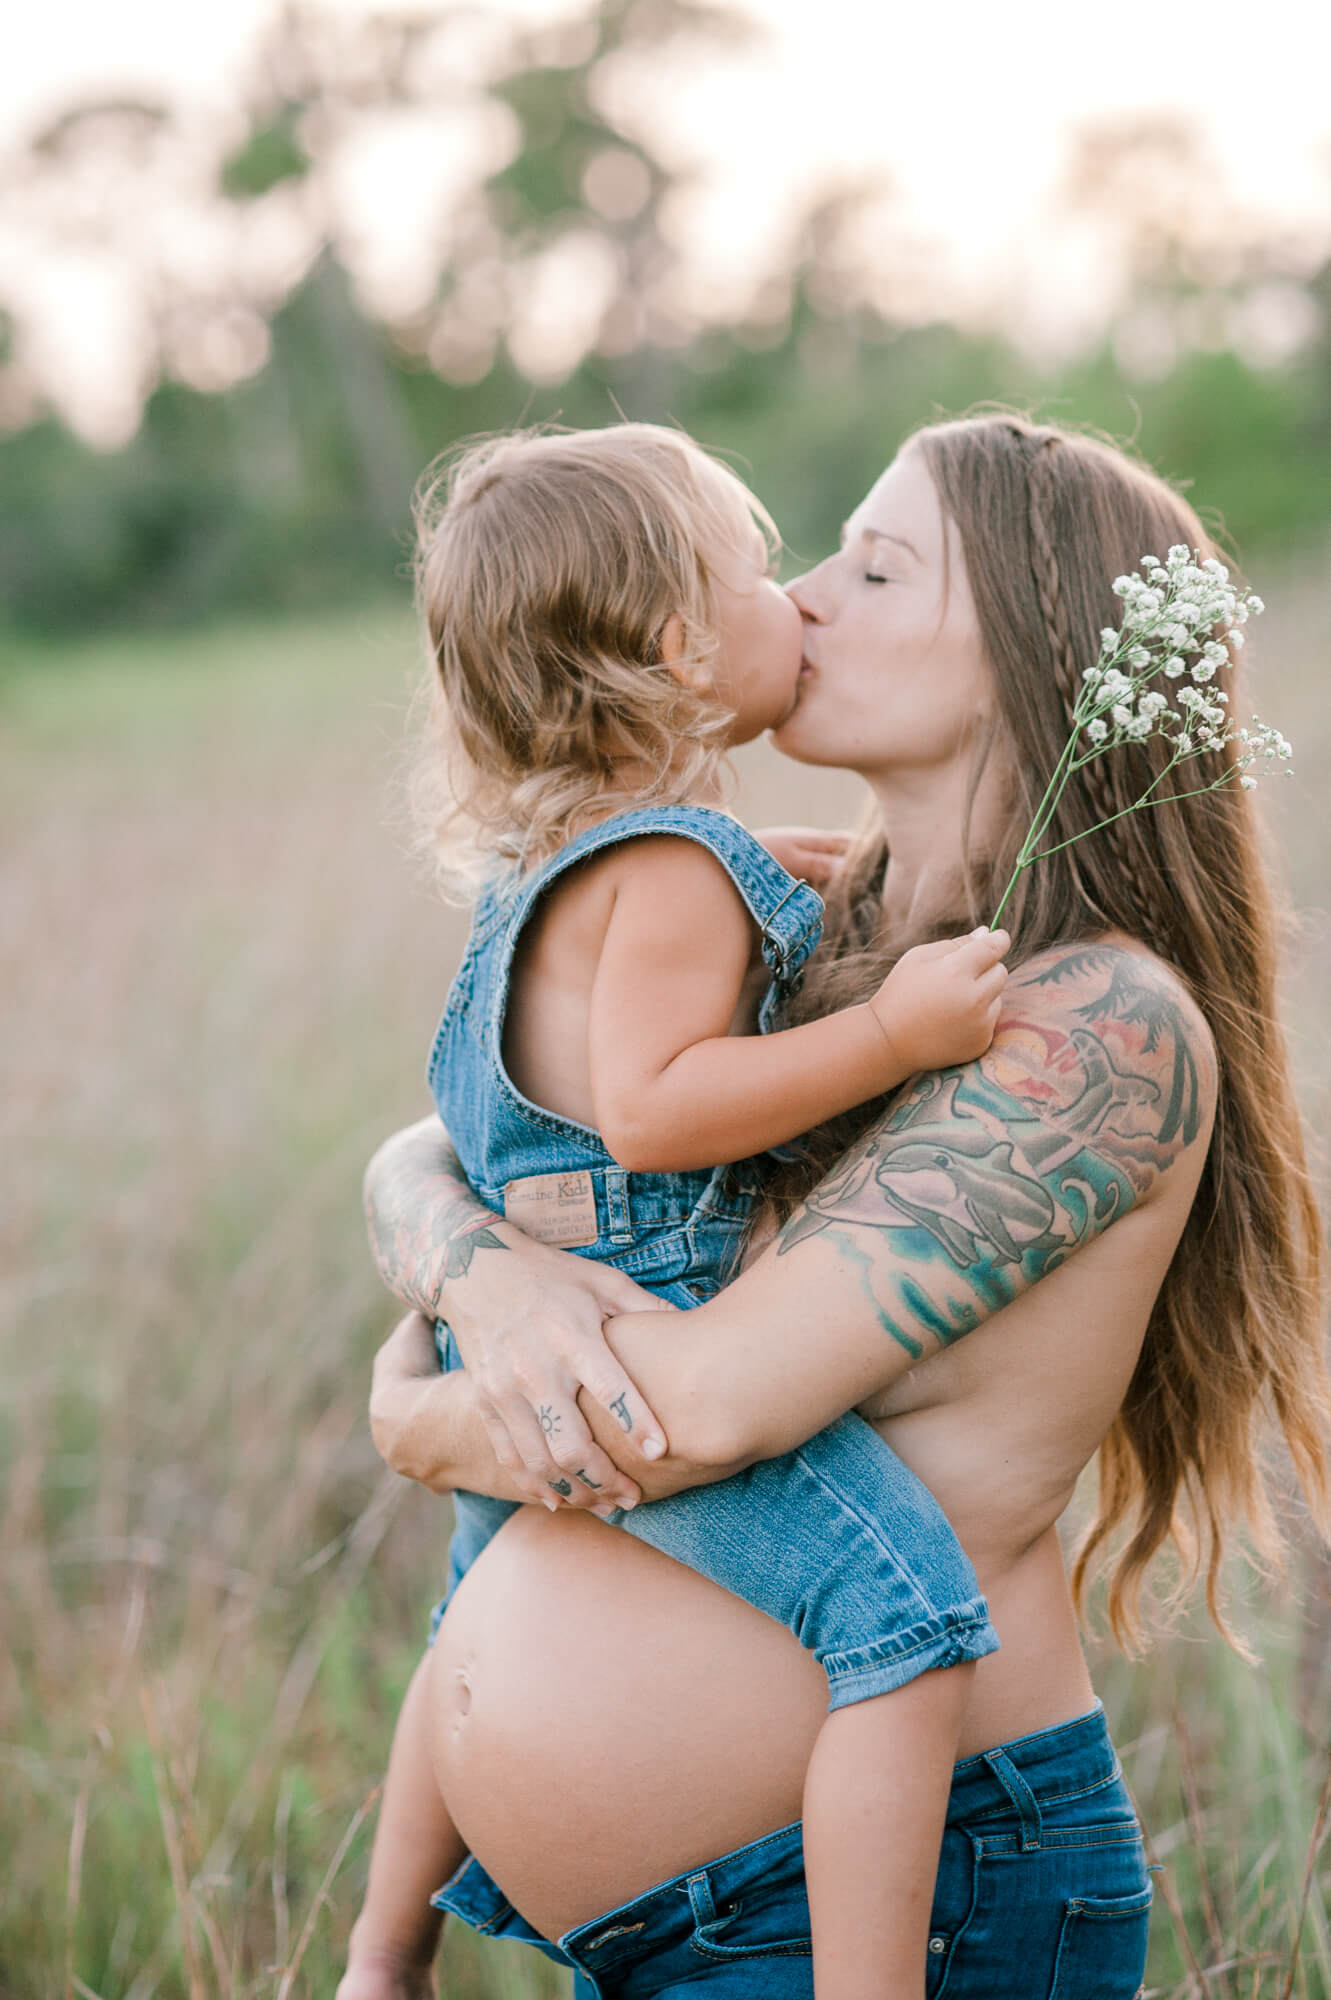 Pregnant mom and young daughter kissing during golden hour while standing in a tall grass field baby fairy tale